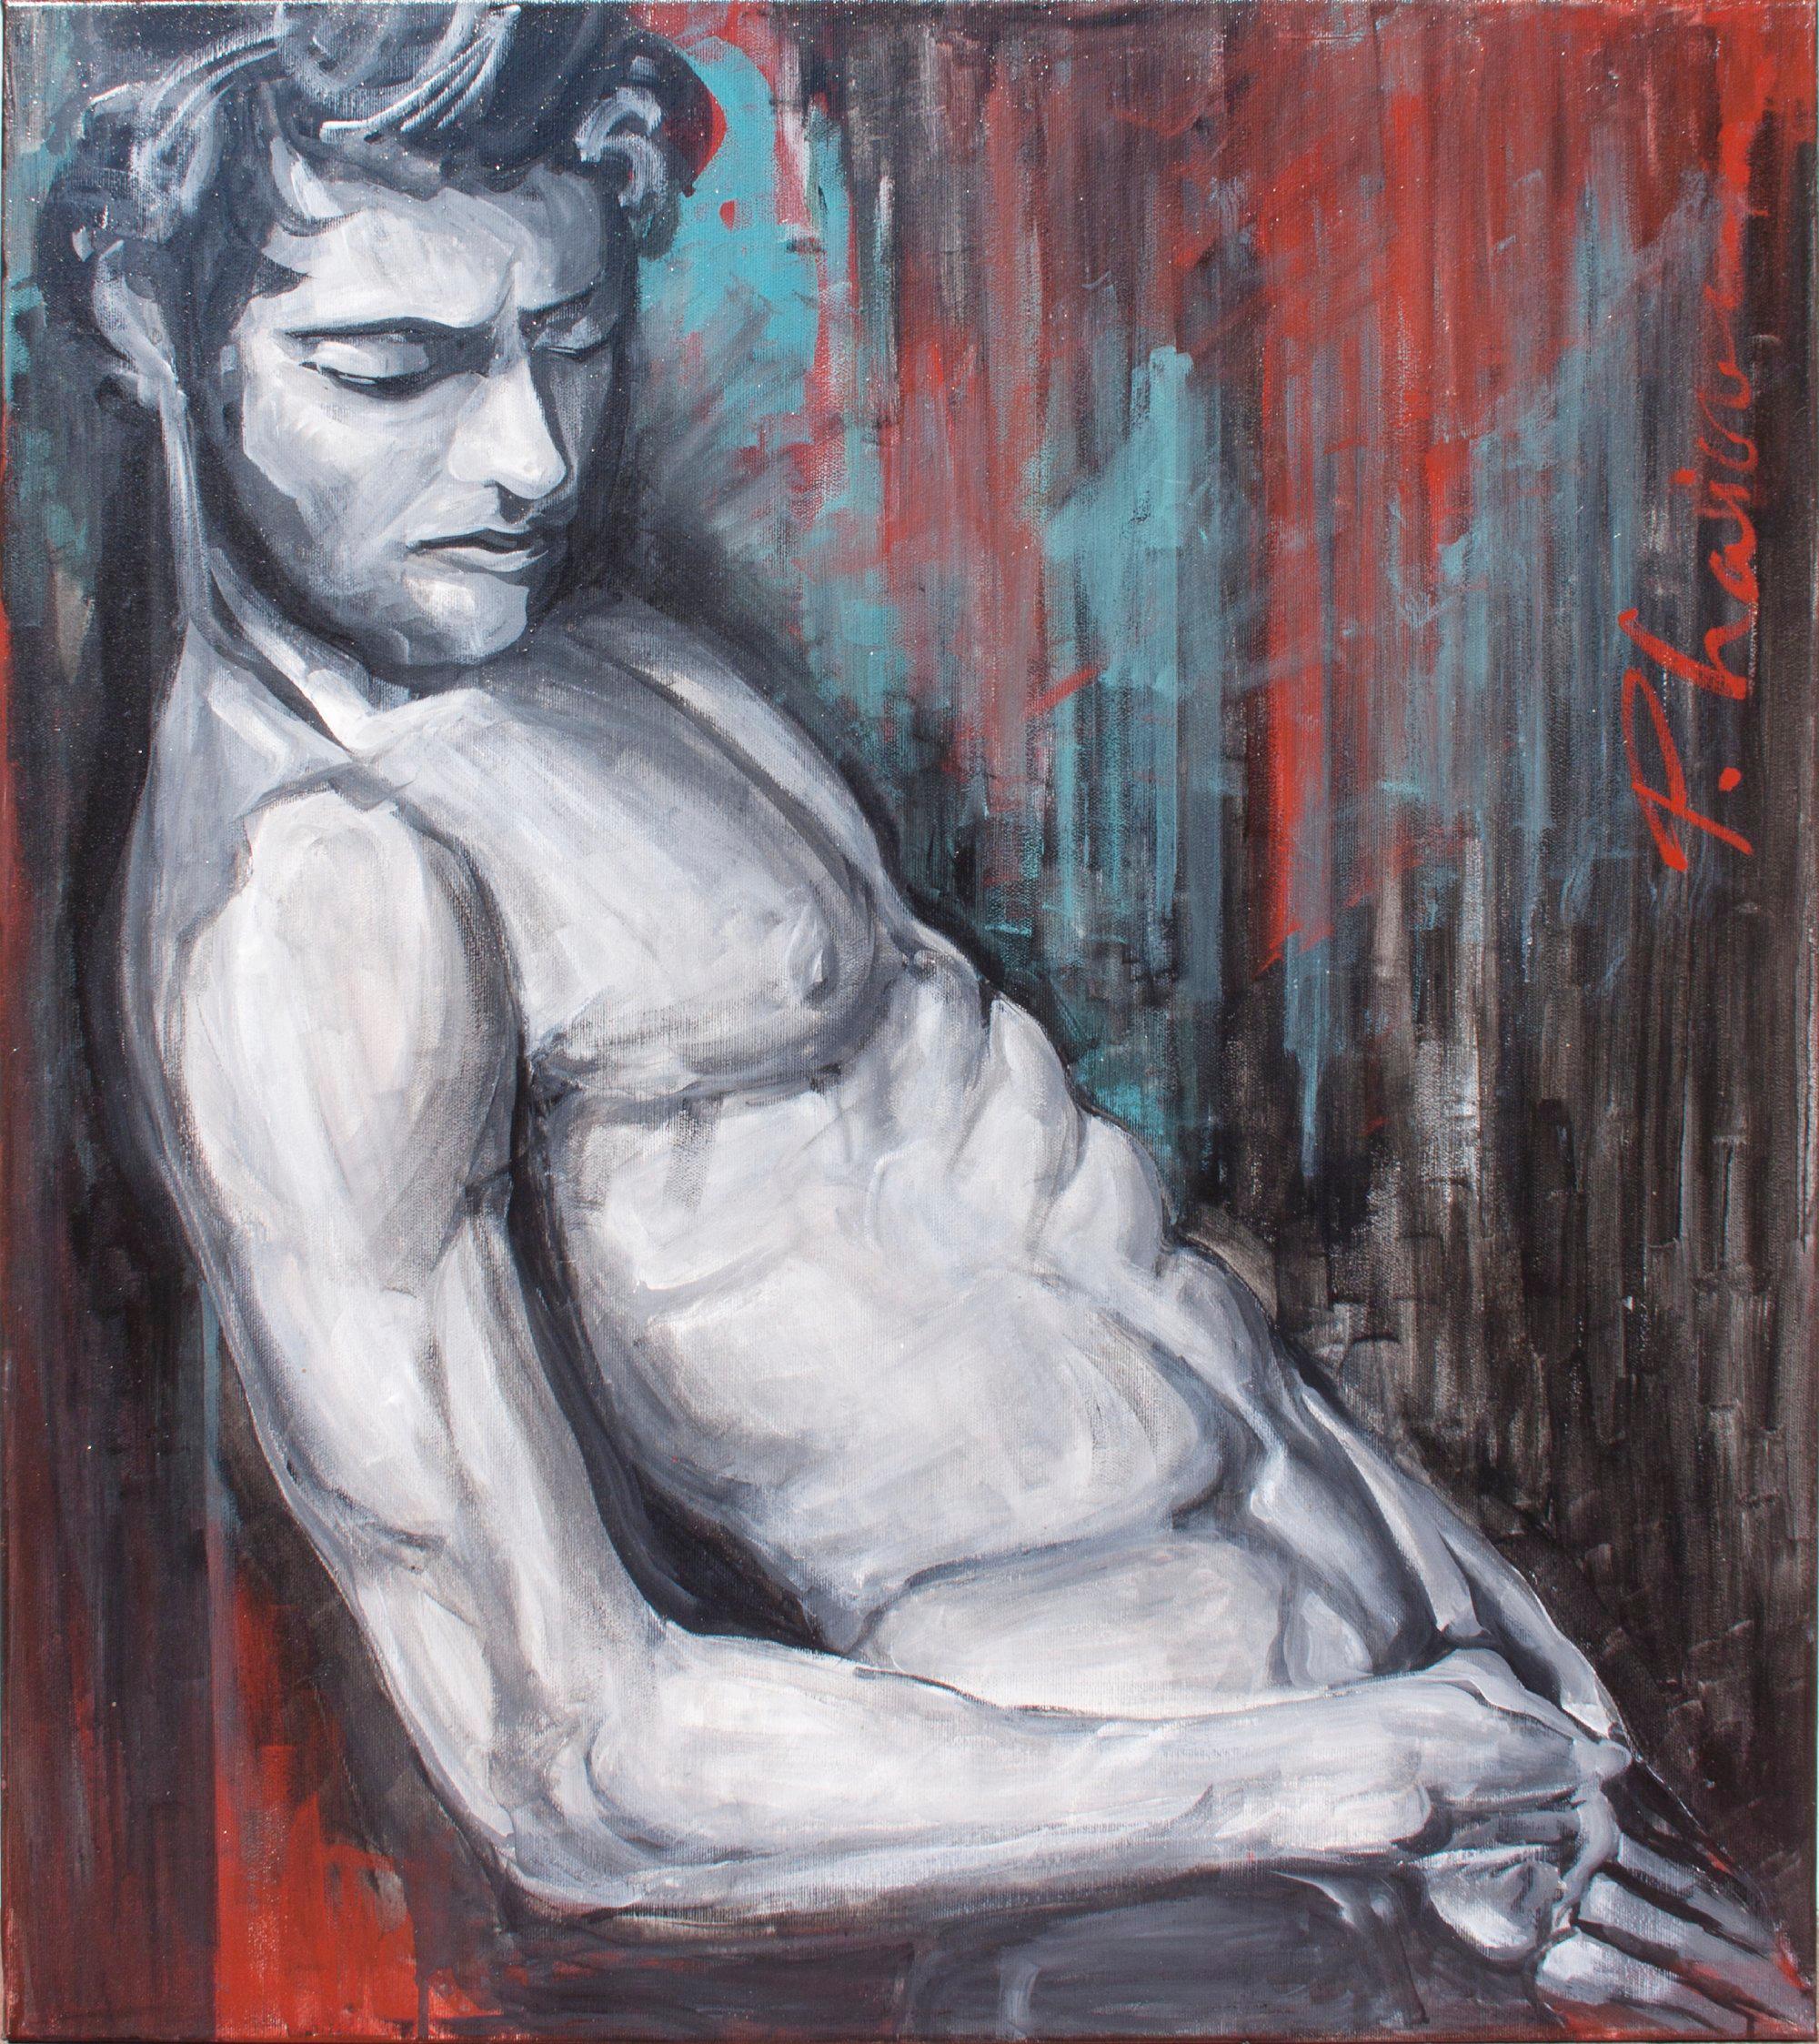 Reclining Male Nude - original painting - unique - by Paula Craioveanu